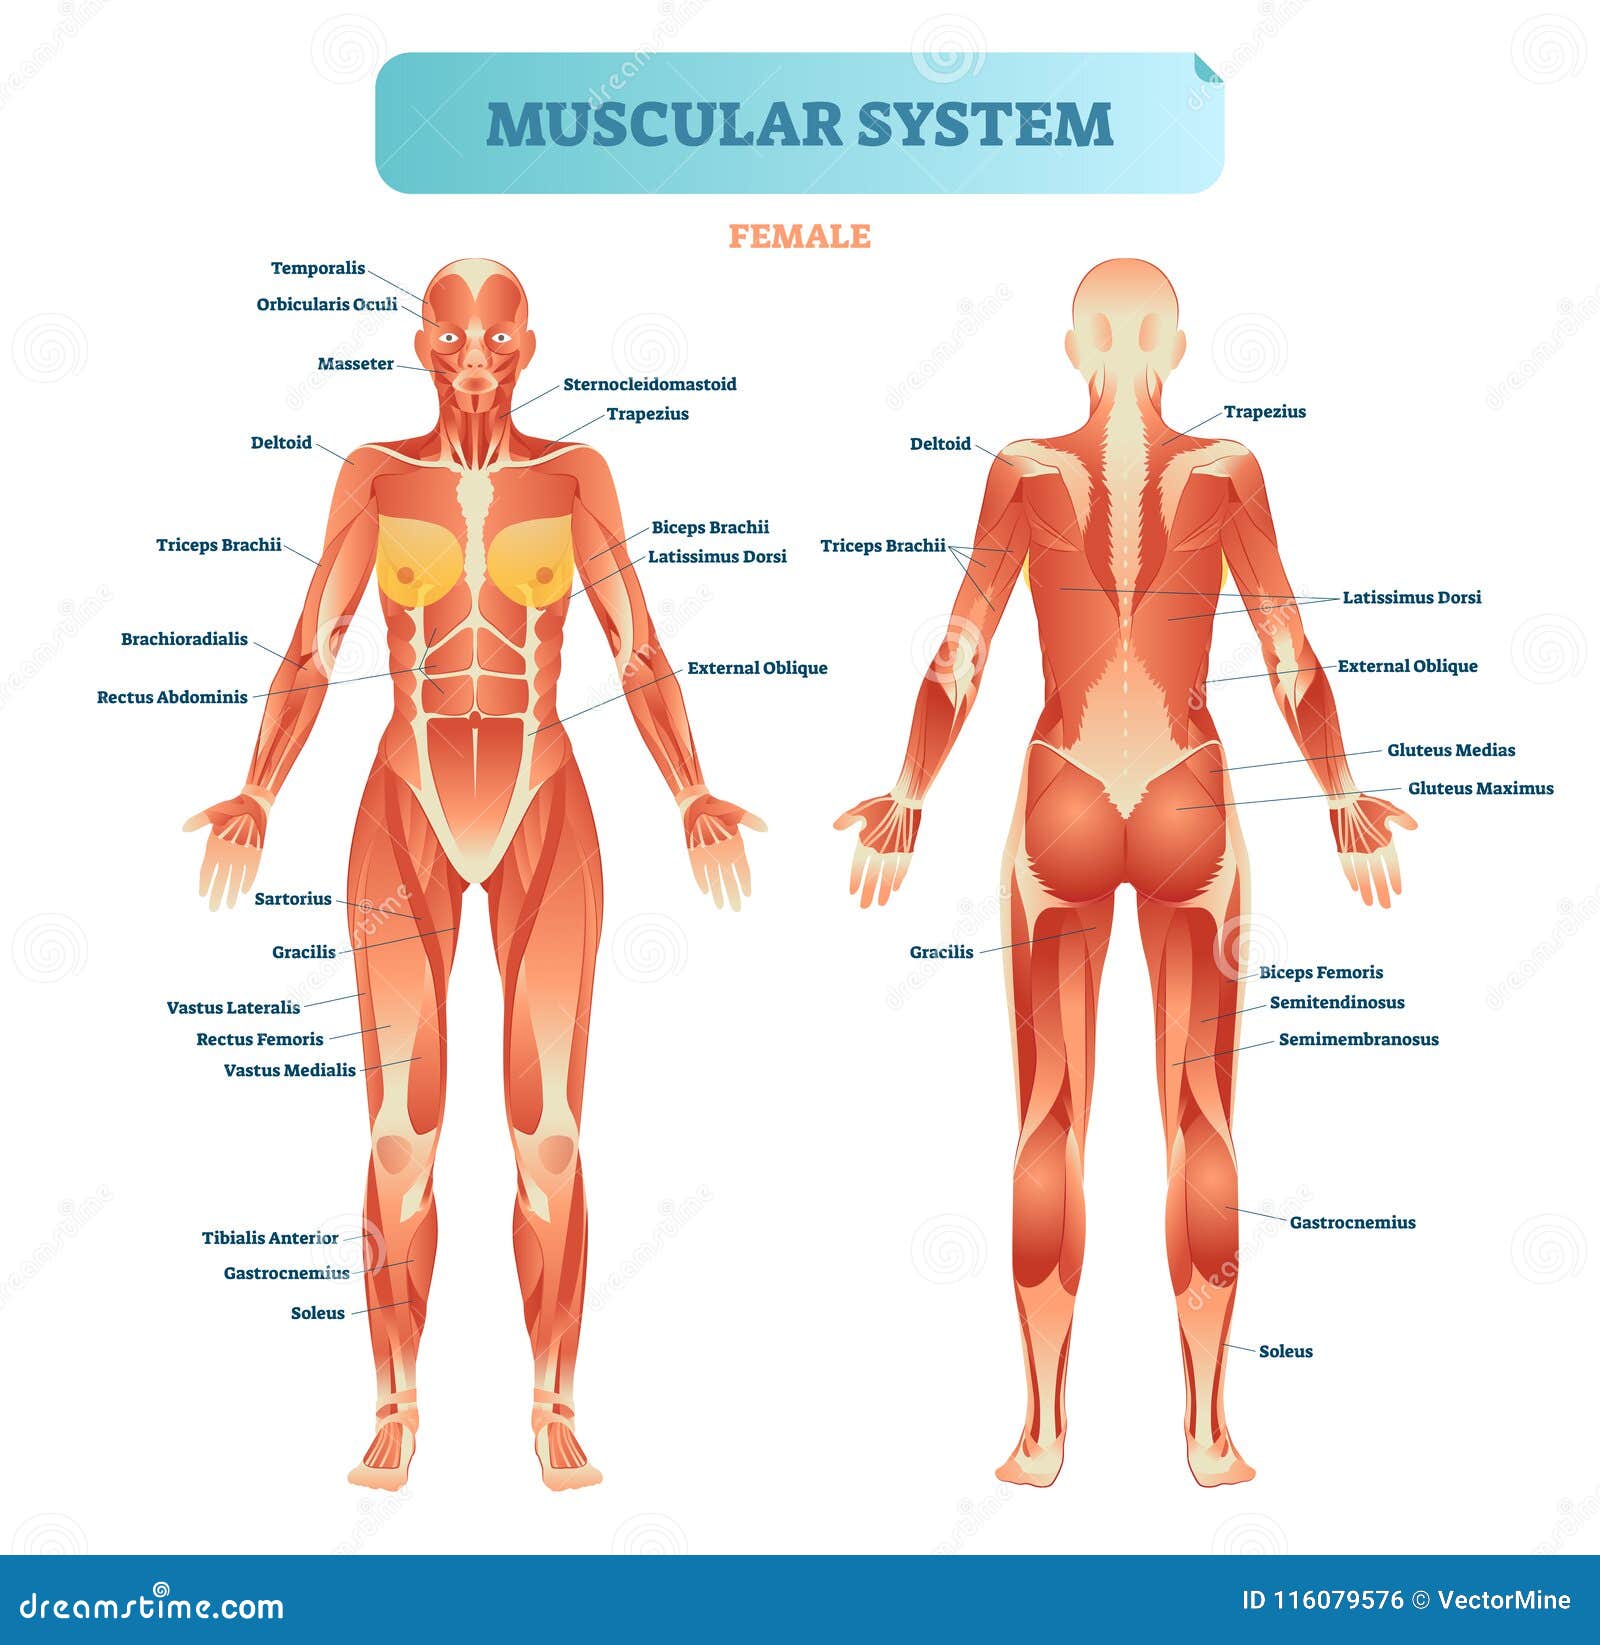 Male Muscular System Full Anatomical Body Diagram With Muscle